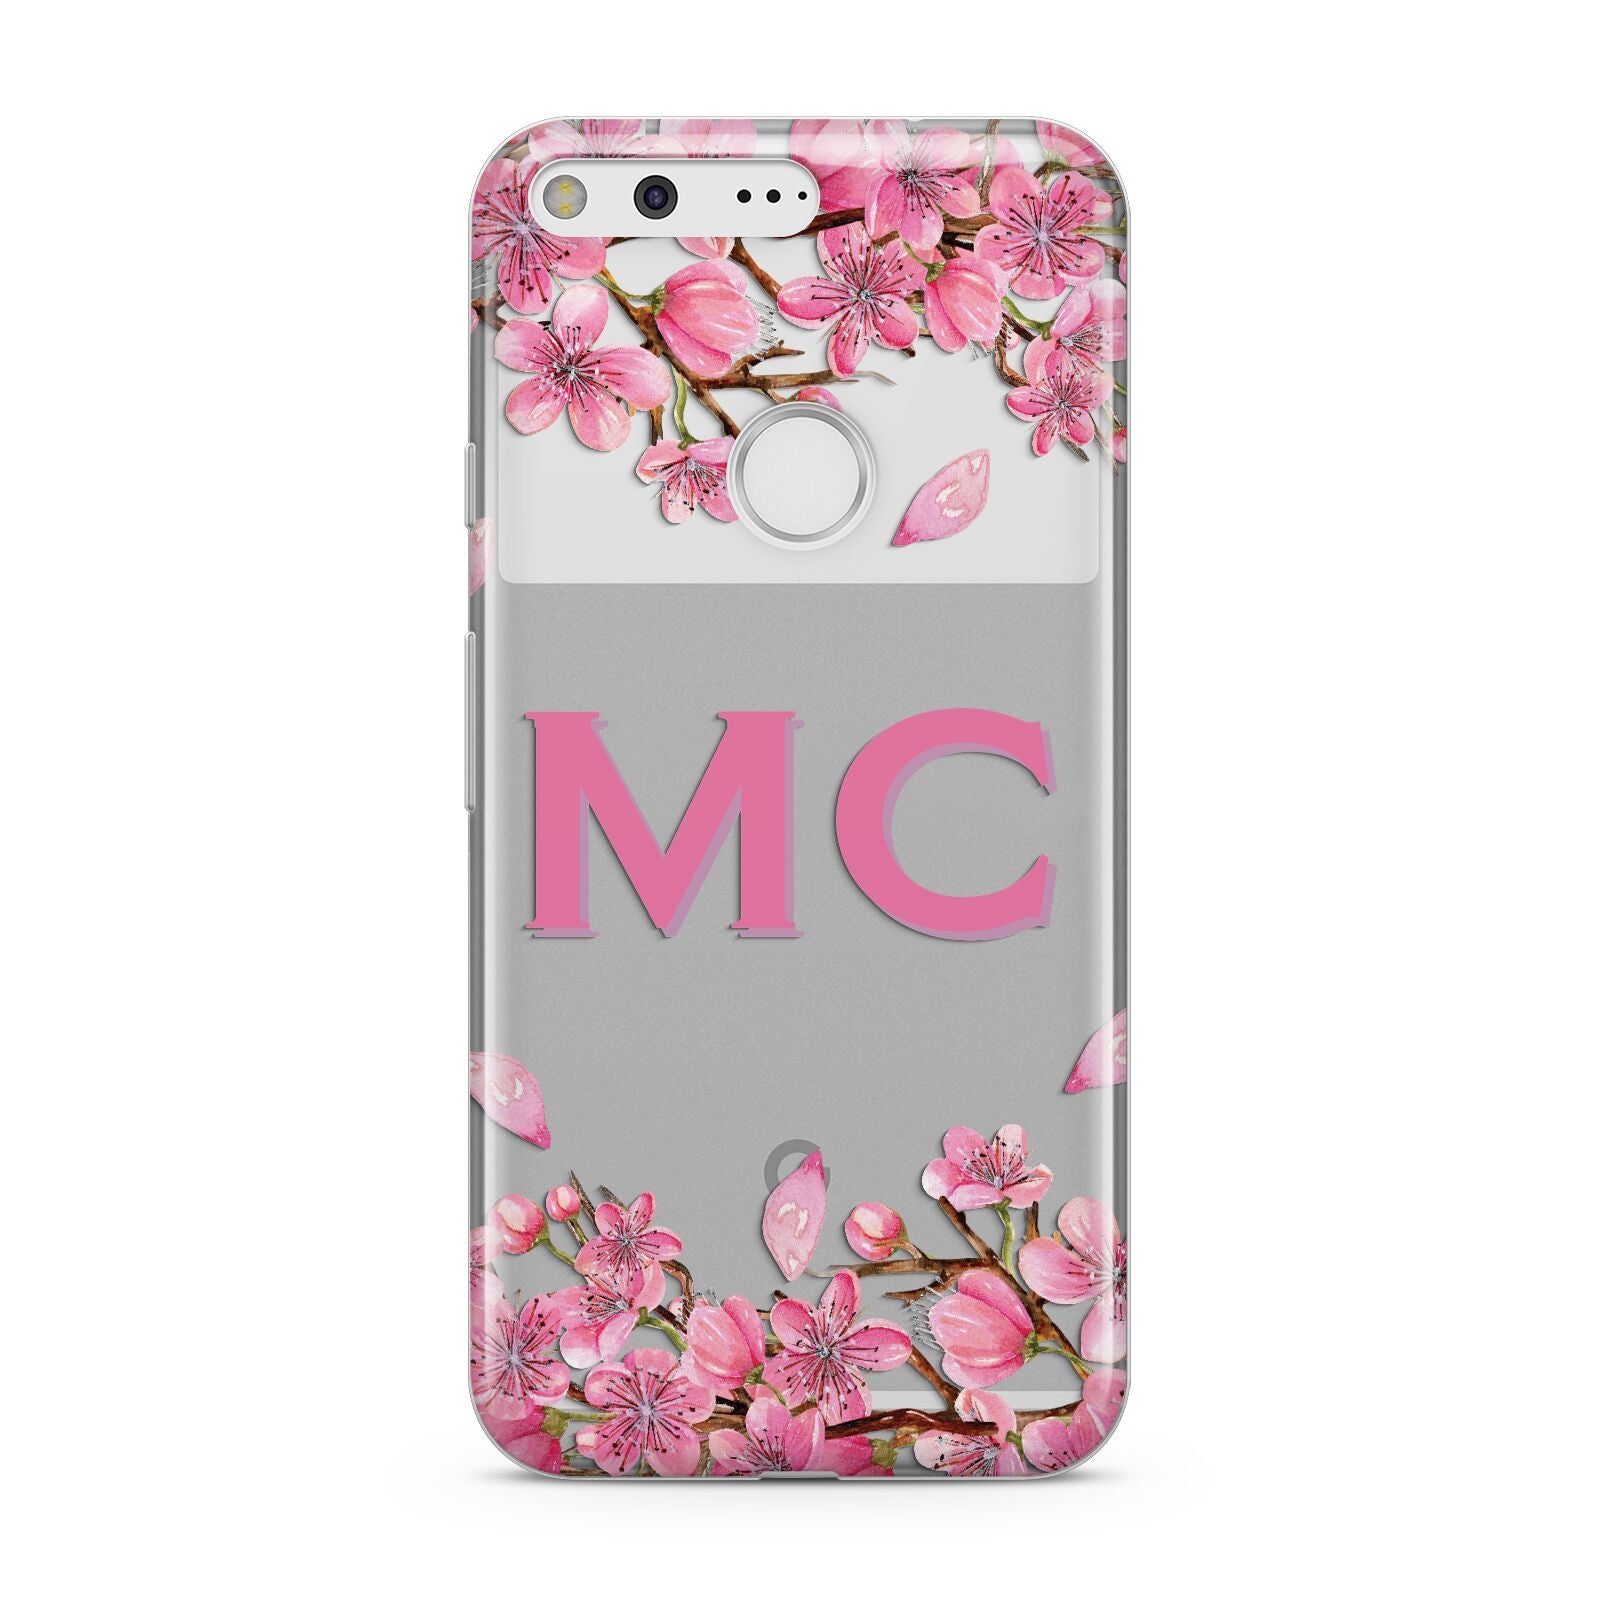 Personalised Vibrant Cherry Blossom Pink Google Pixel Case